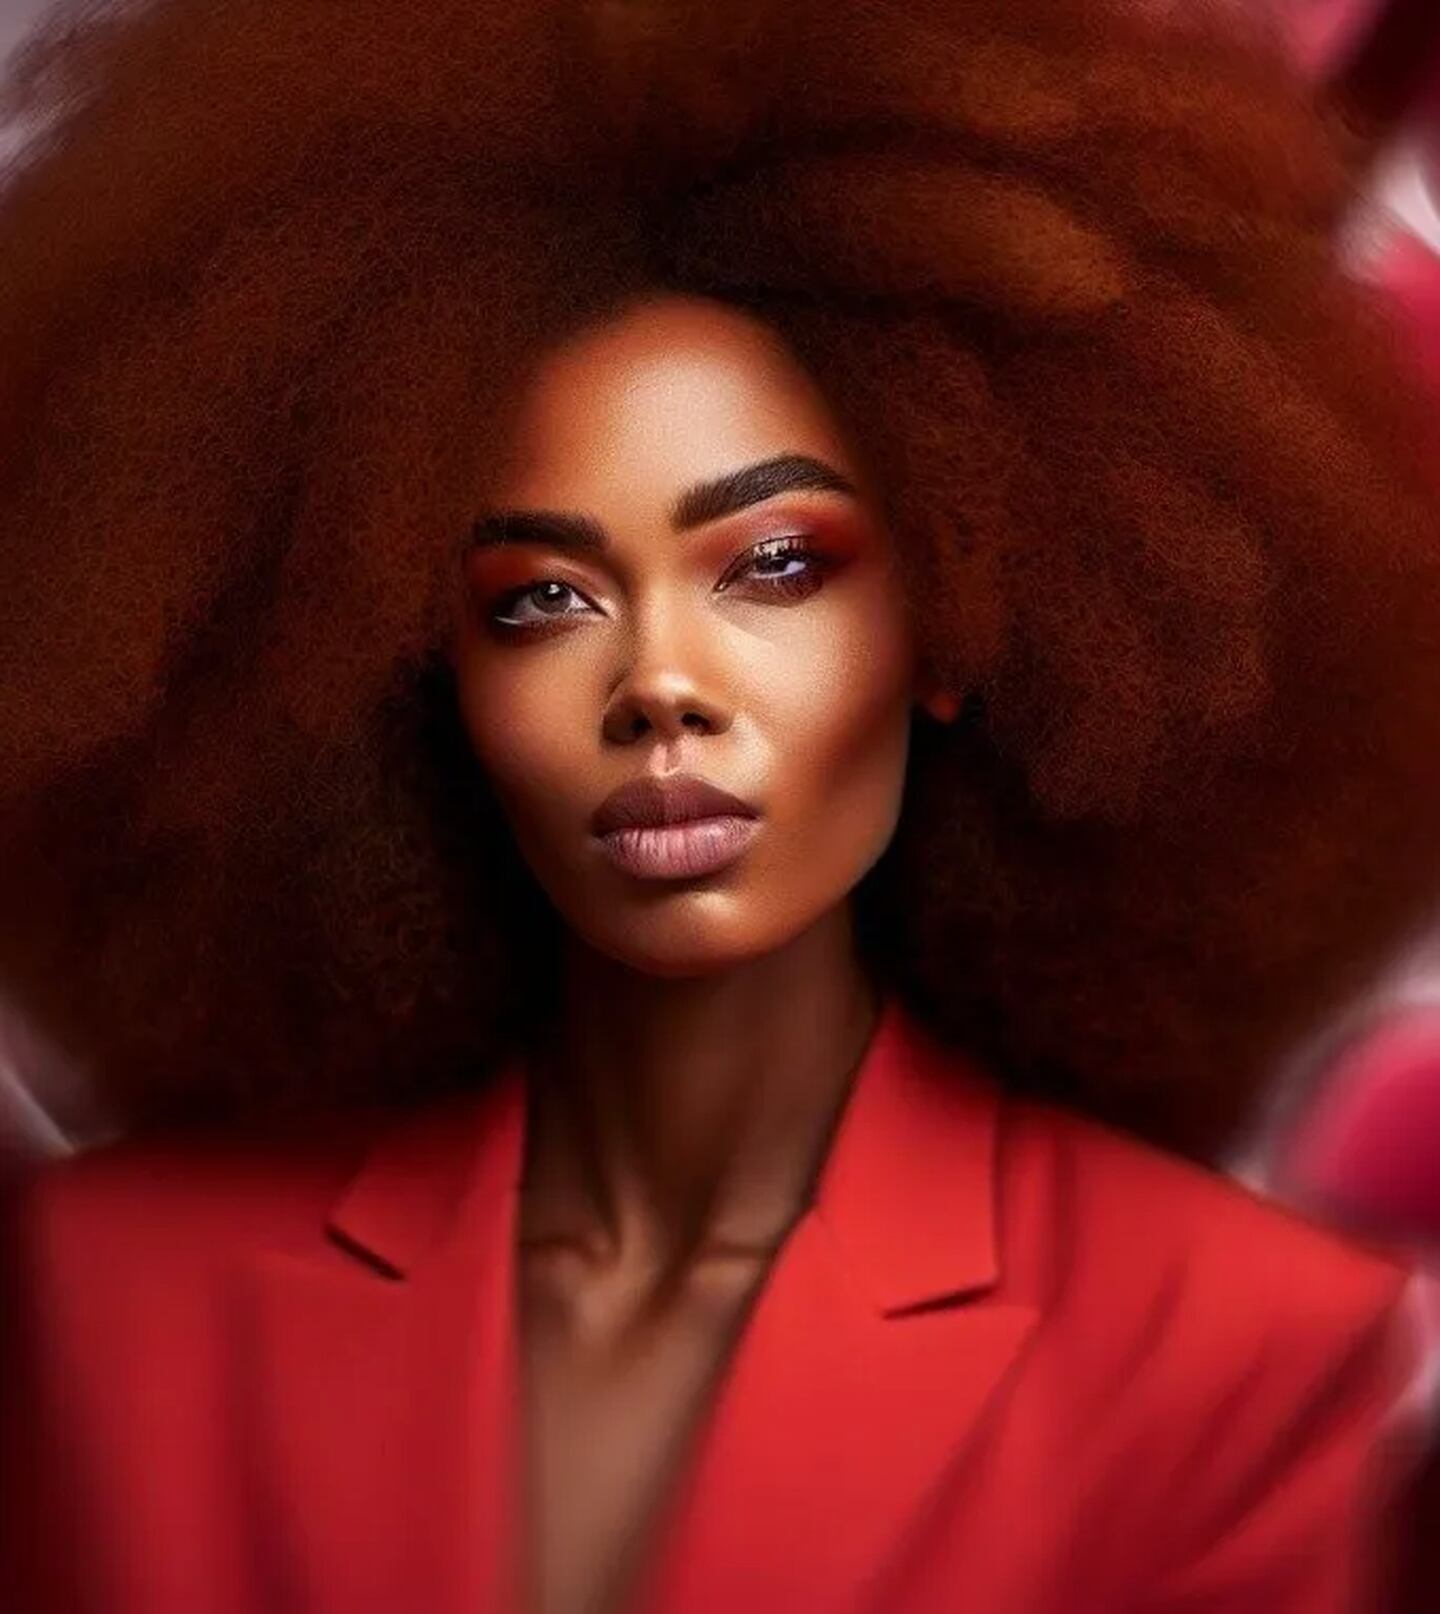 This is how Miss Bello would look like "The Powerpuff Girls" in real life, according to Artificial Intelligence